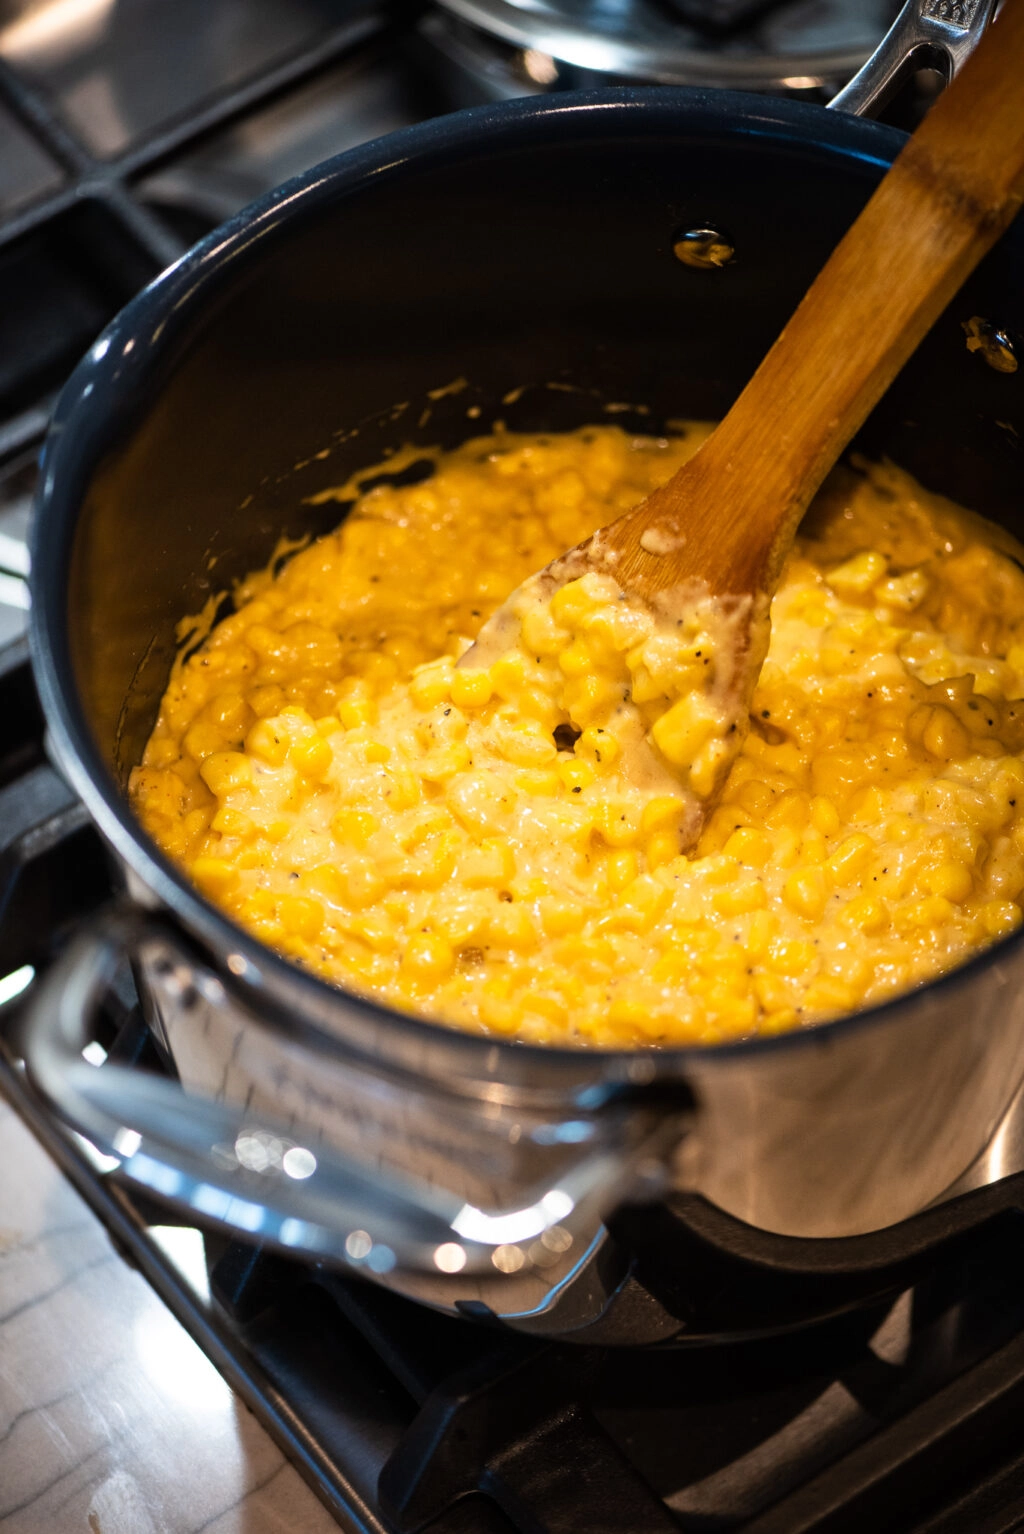 Creamed corn after adding cream, milk, and cheese